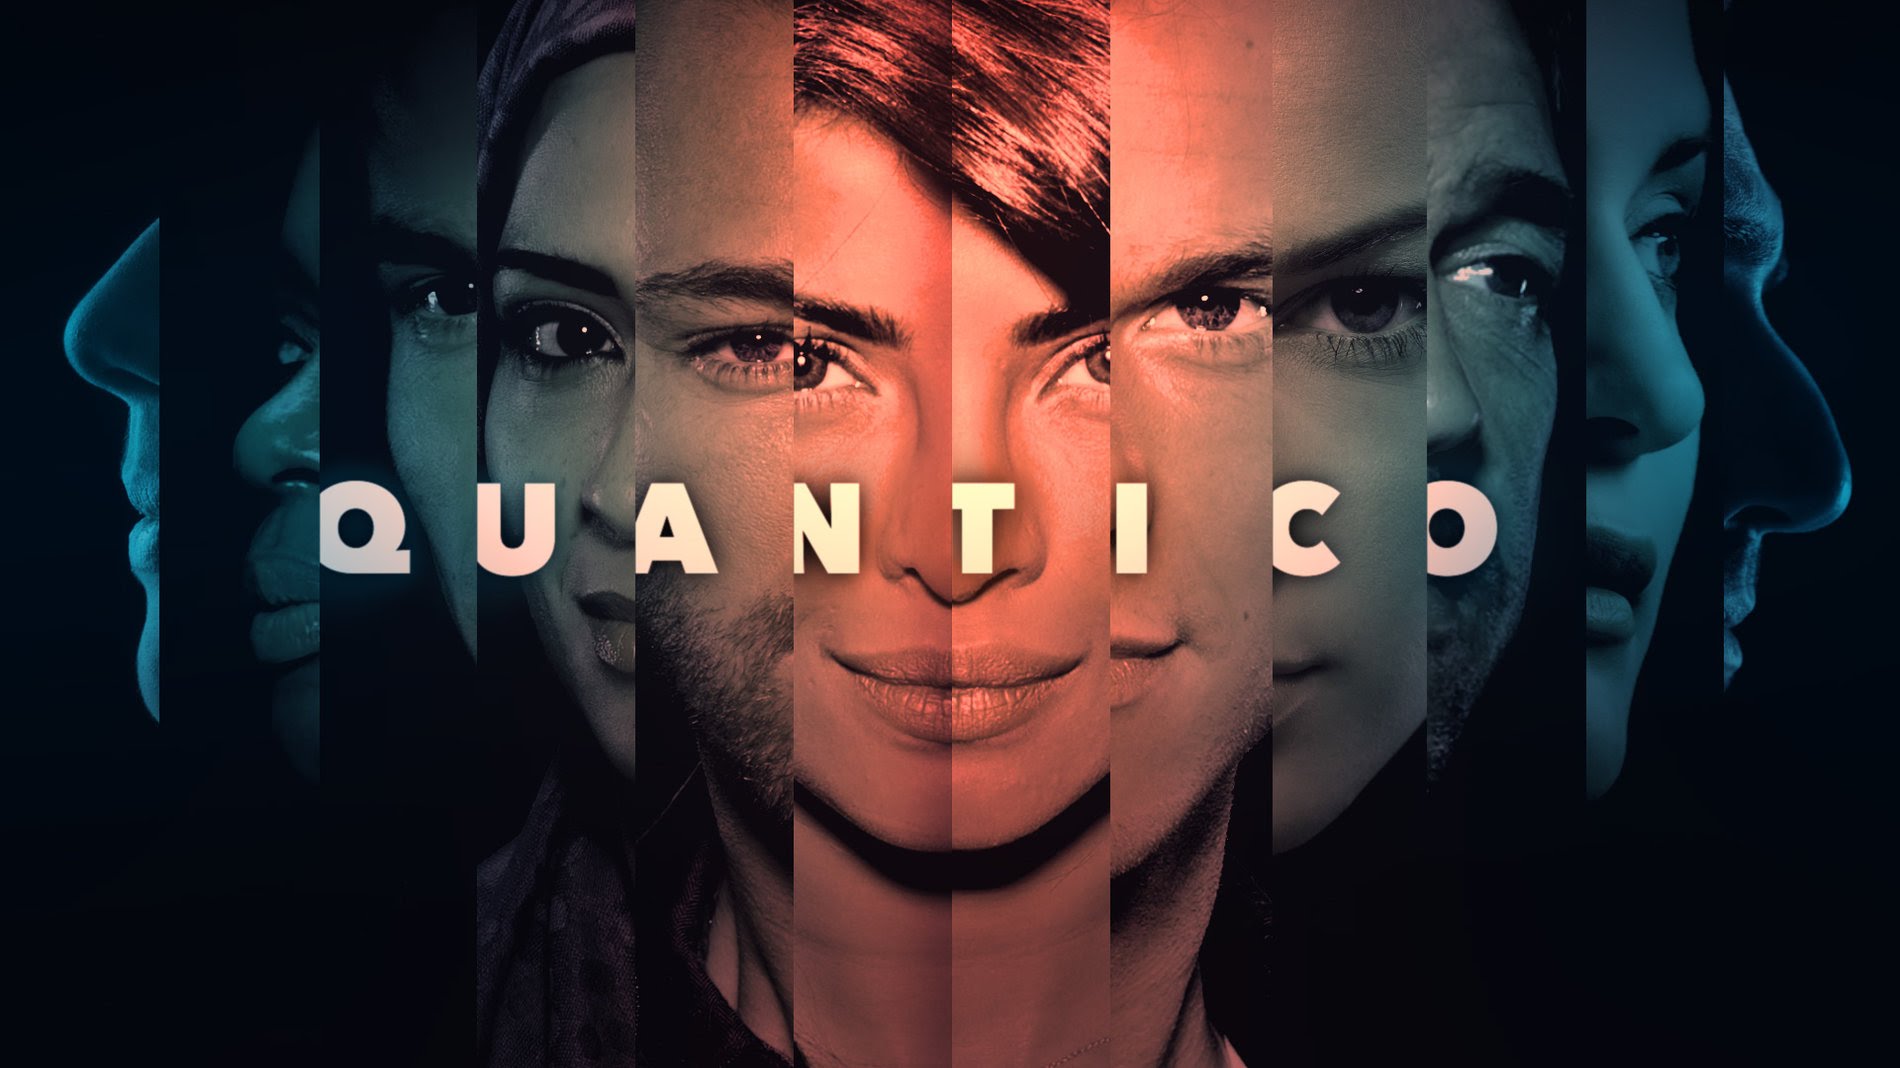 Digital Dimension selected by ABC to participate in success of TV series QUANTICO